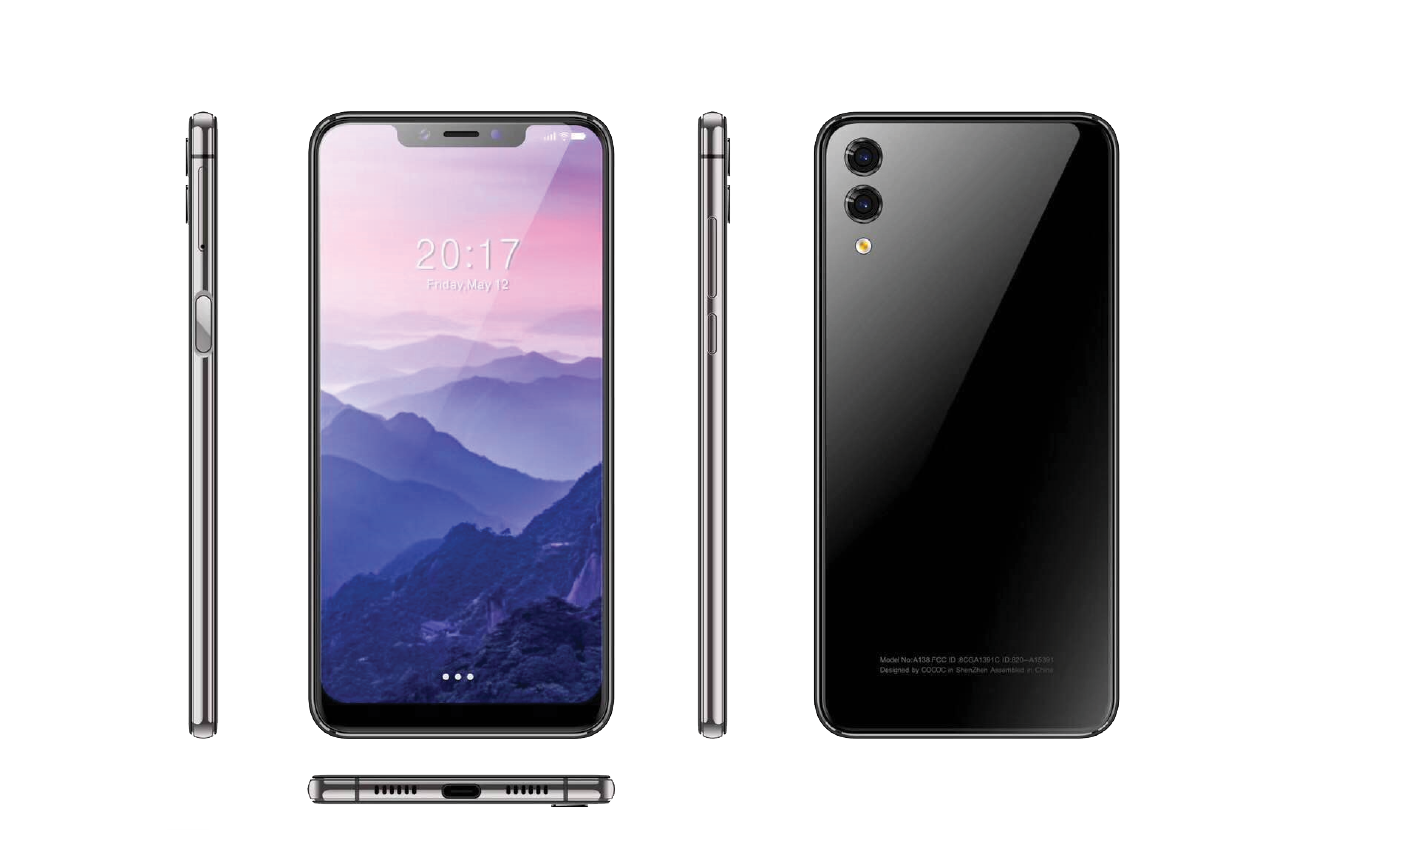 Noit Epic A200 - The Noit Epic Is A Top Of The Line Phone With Tons Of Features Such As, Thumbprint Recognition, 128gb Of Storage Space, And A Dual Sim Card Slot. Plus, At Half The Price Of The Google Pixel 3 And The Samsung Galaxy, It's Value Can't Be Beat!